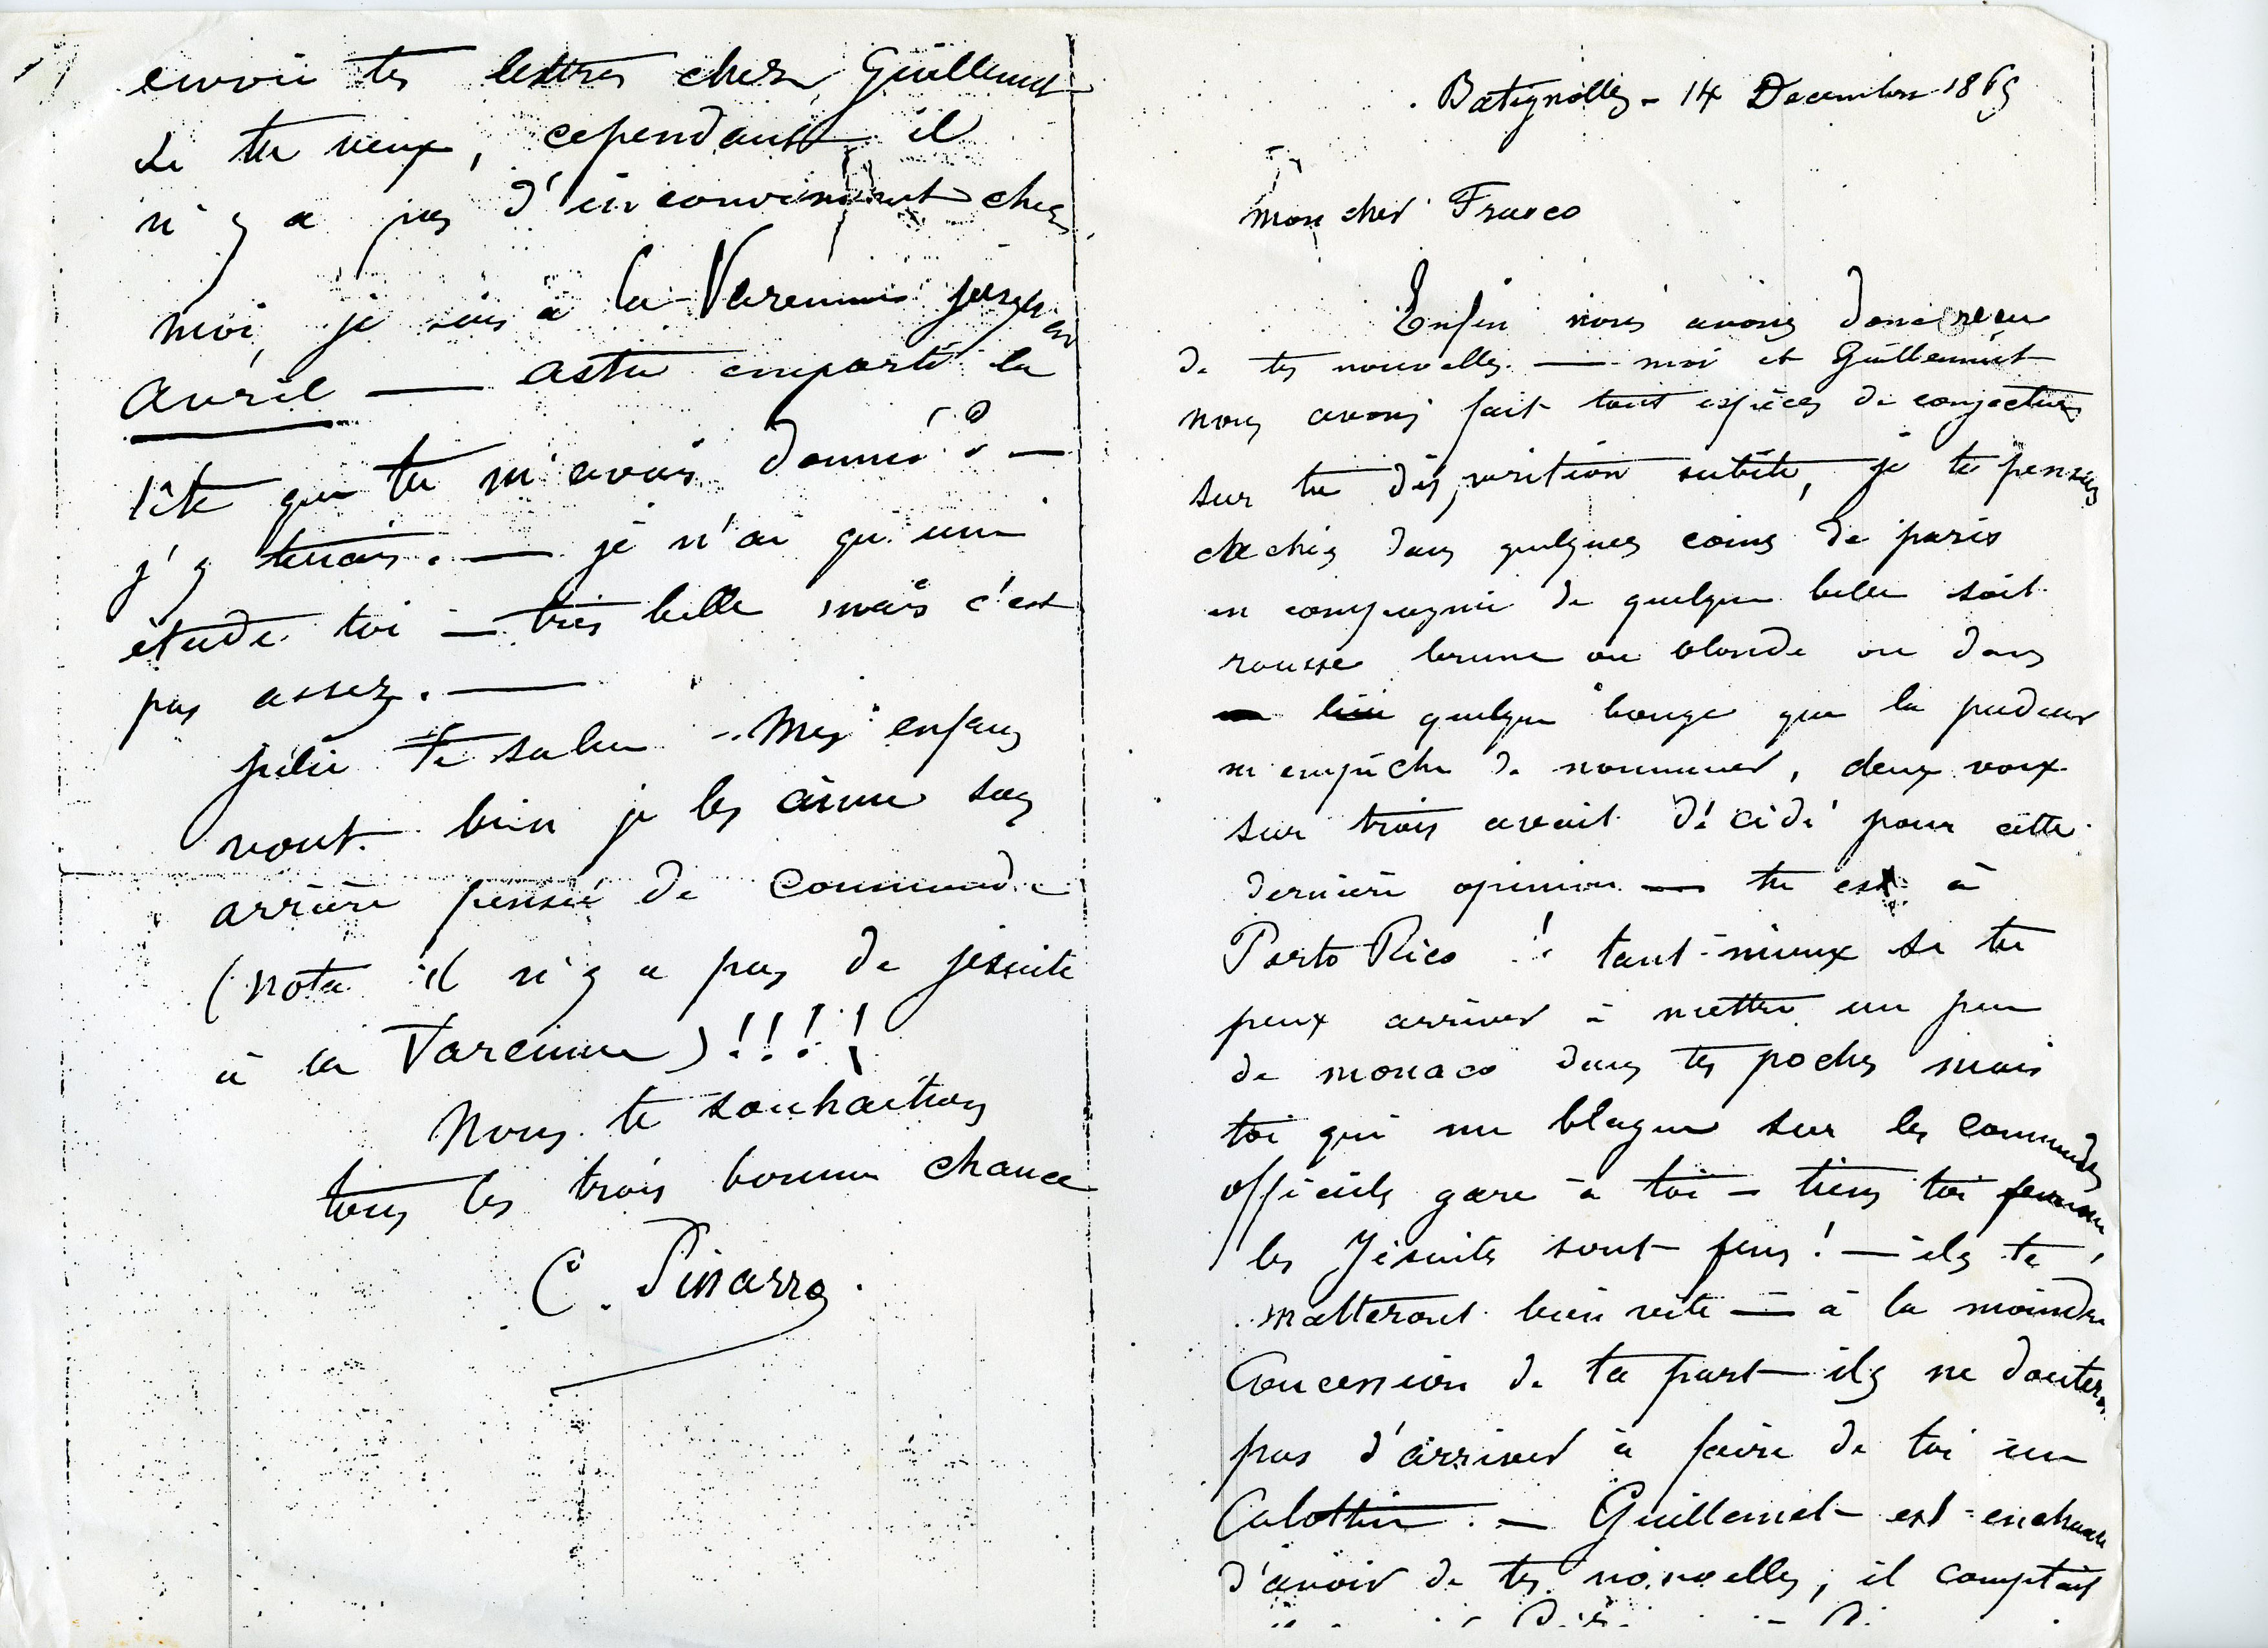 Searching for Oller, w-i-p a Pisarro letter to Francisco Oller, my great-great-grandfather